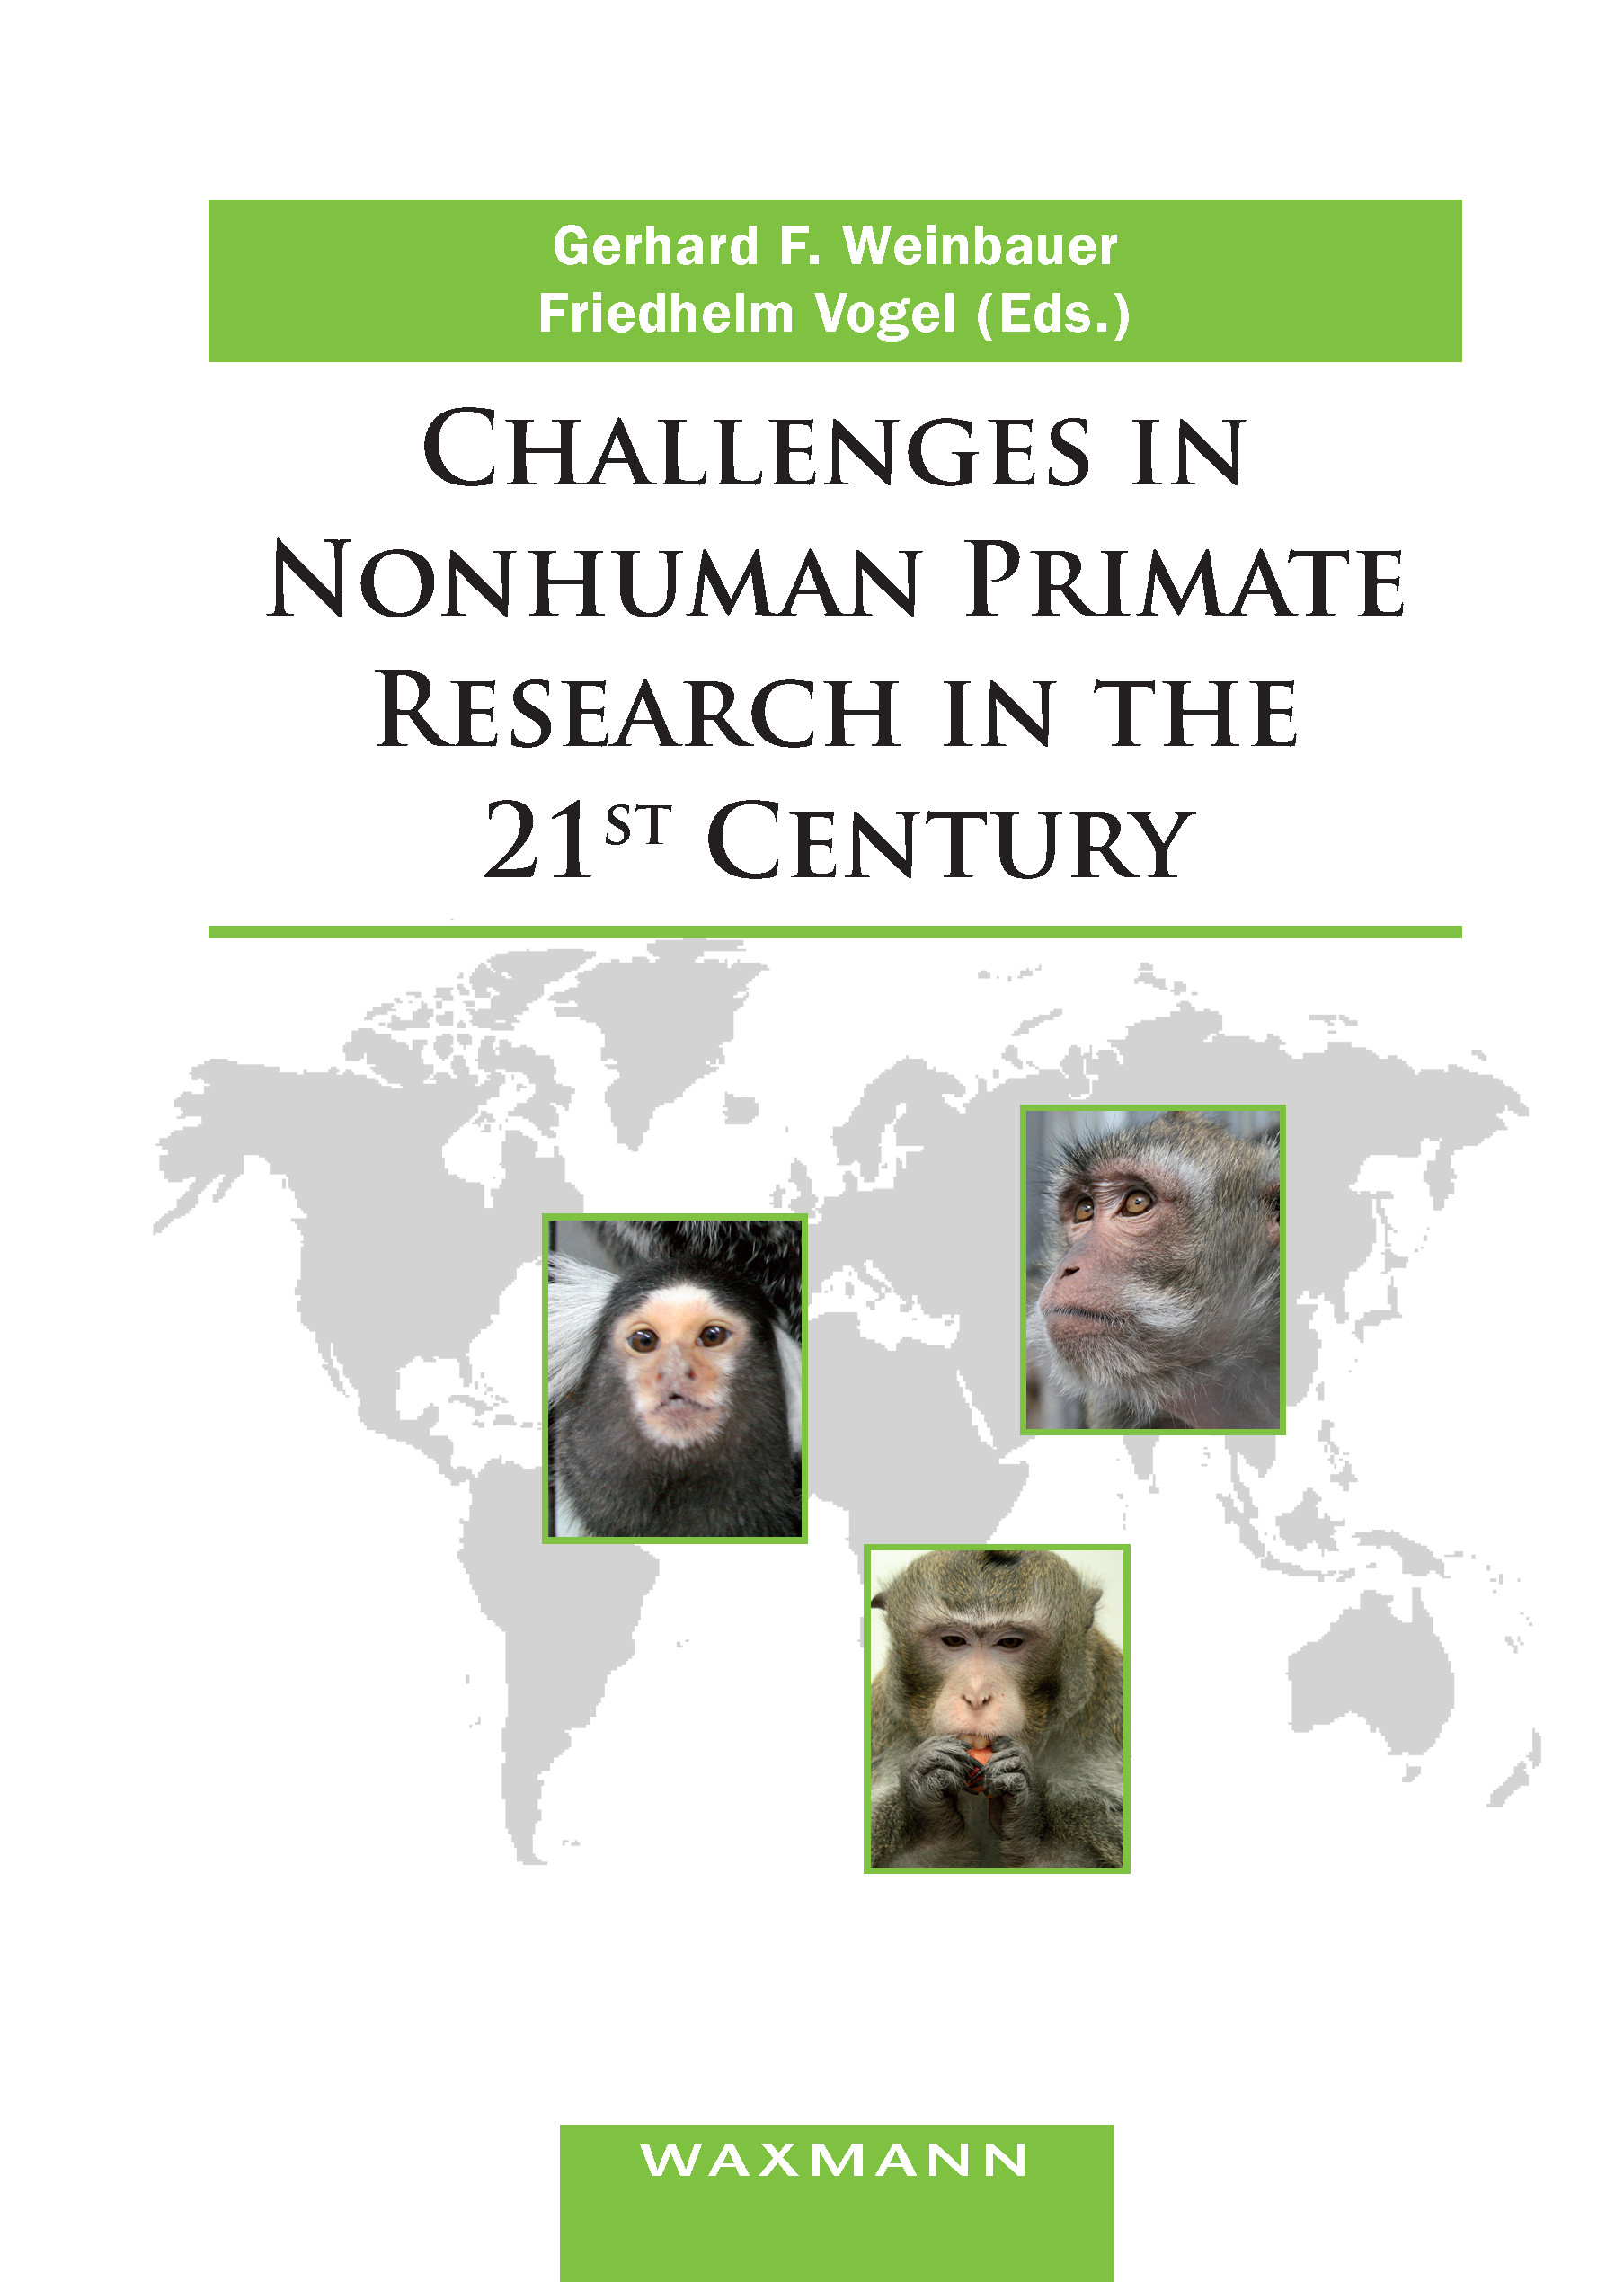 Challenges in Nonhuman Primate Research in the 21st Century